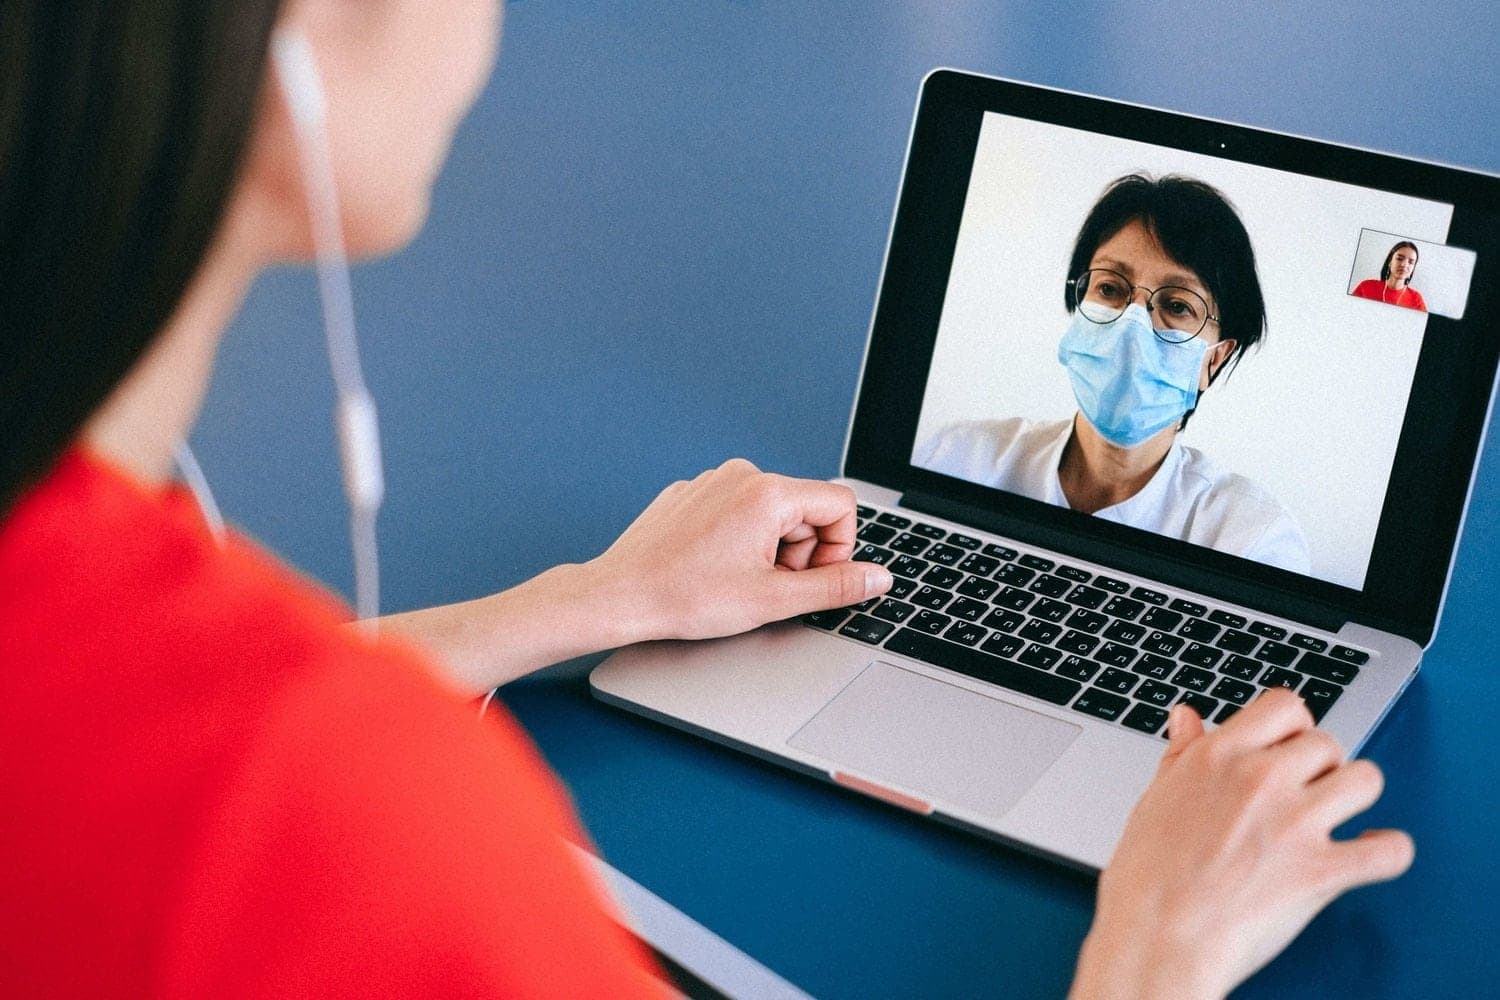 A patient communicates with a doctor online